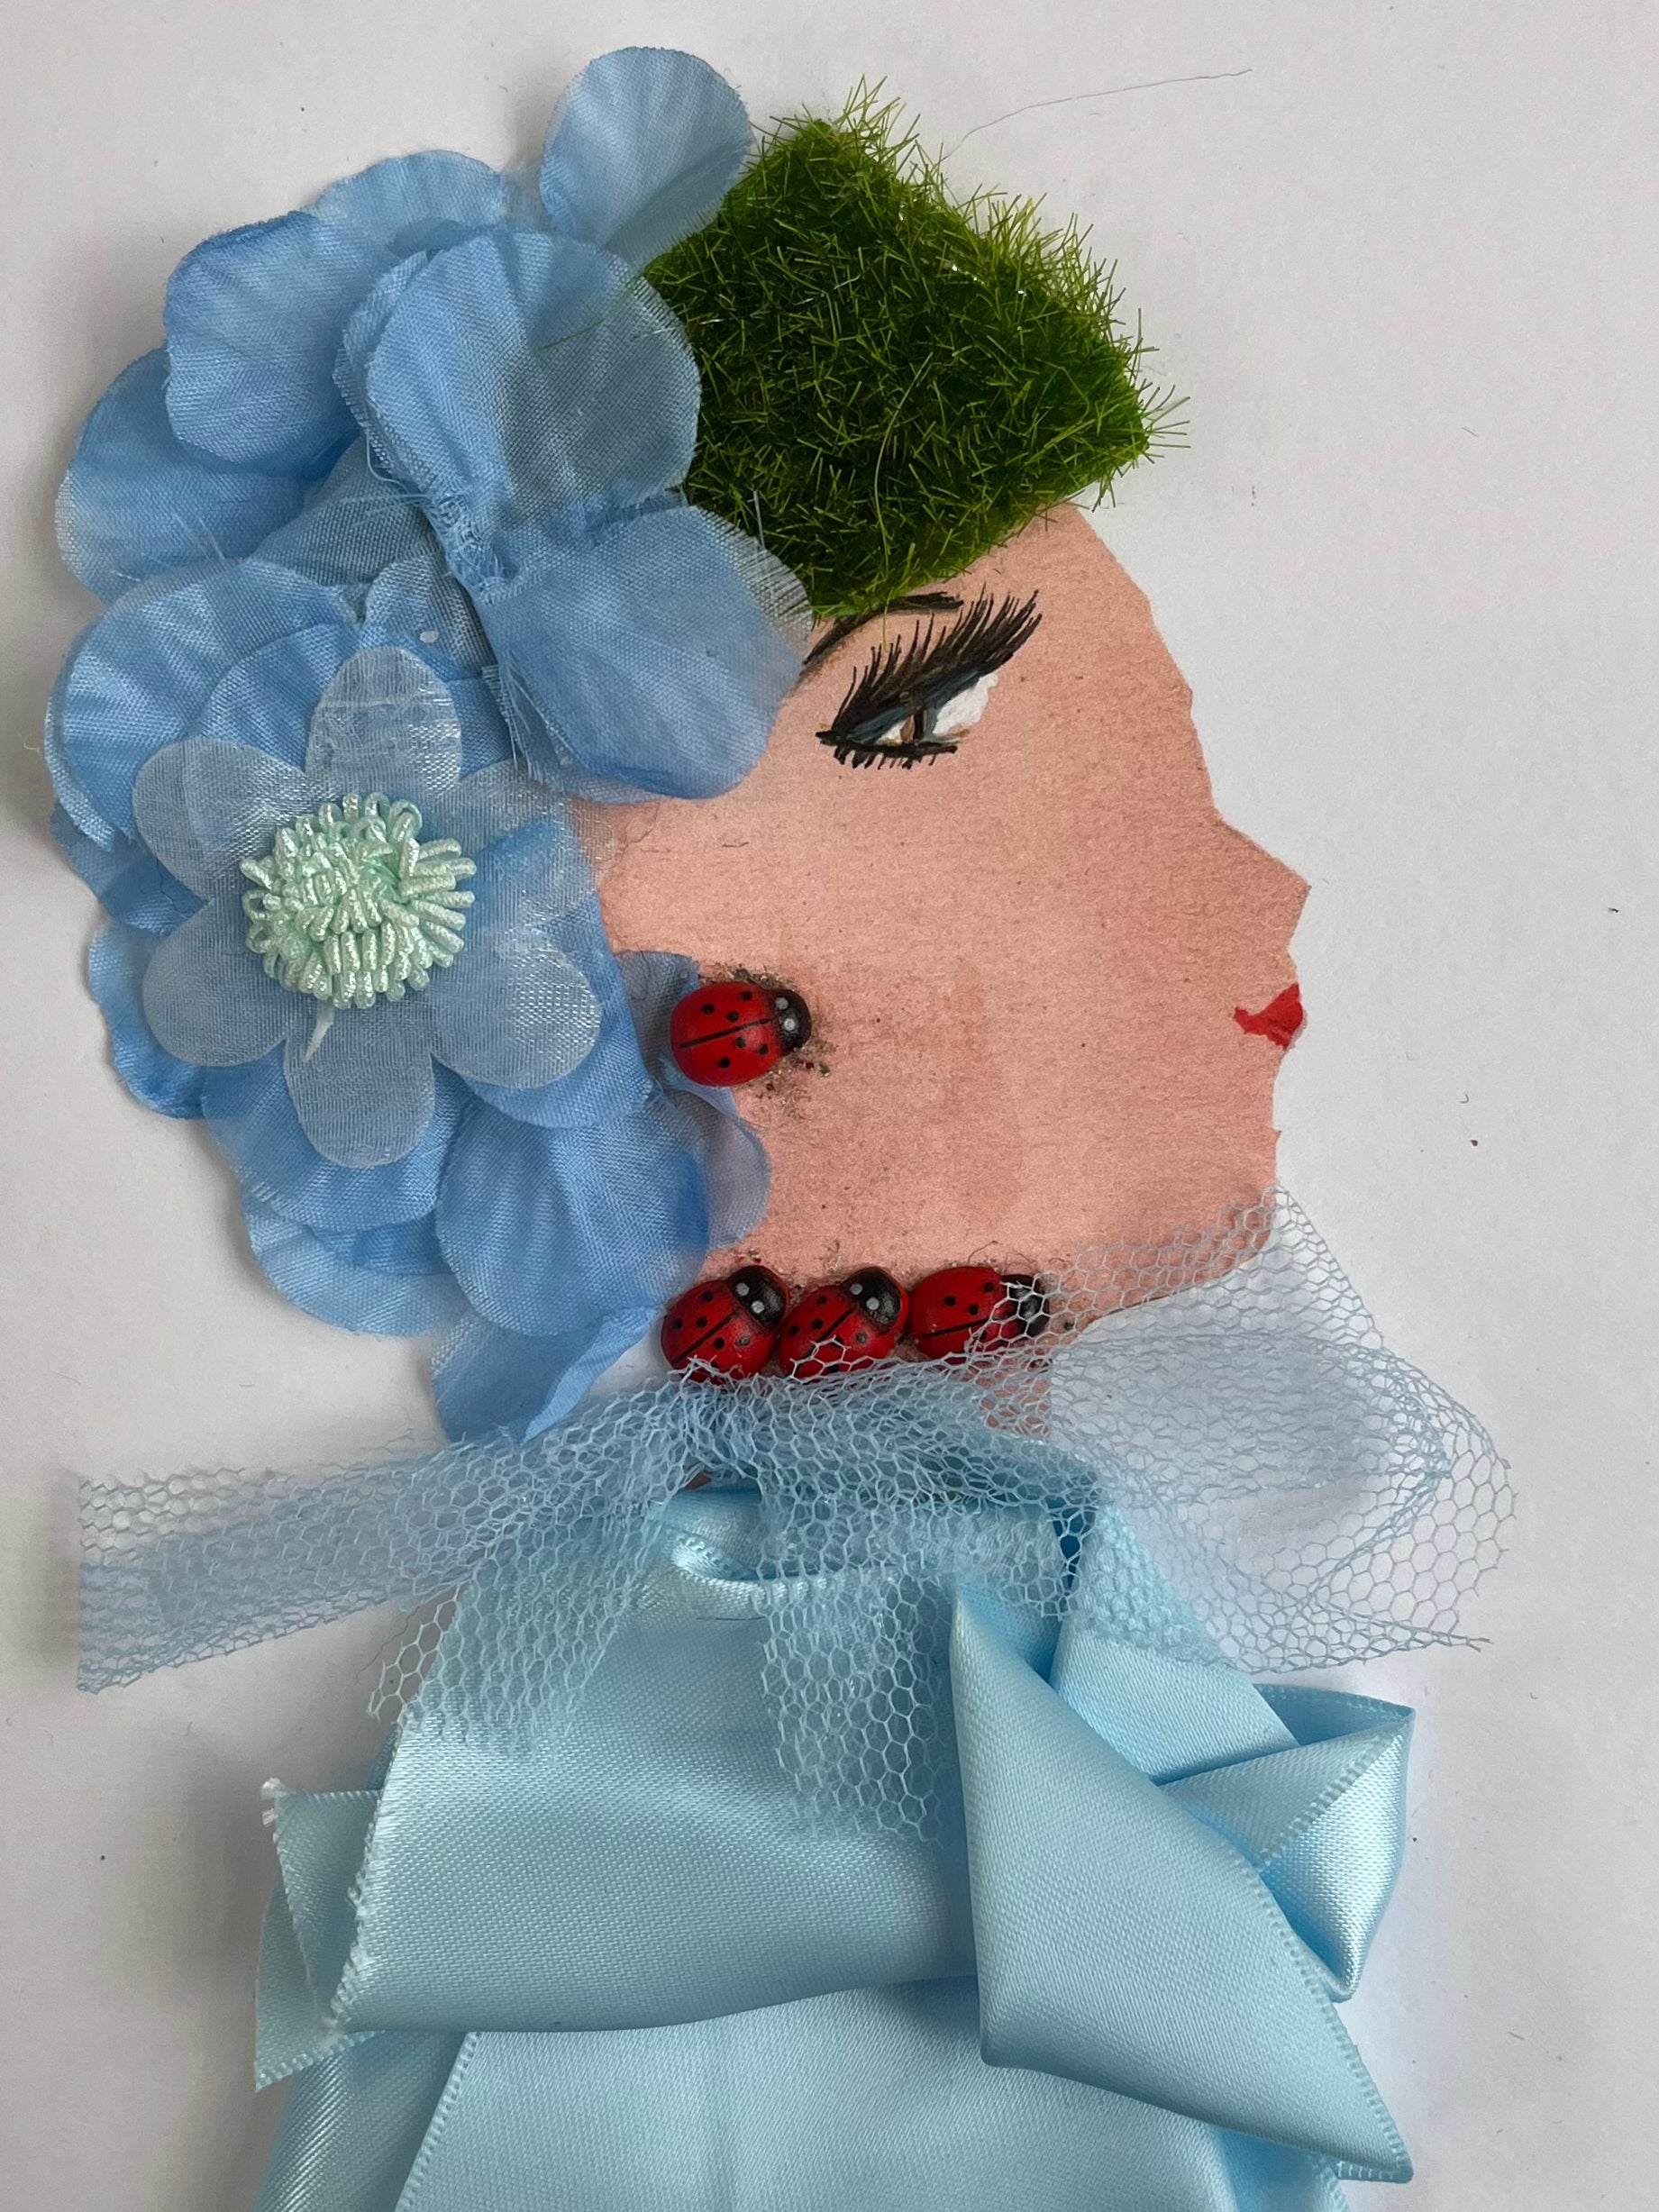 This card has been given the name Gillian Jubilee. Her blouse is a powder blue silk material, and she wears a matching netted scarf. Her hair is made of a grass looking fabric, and she has blue flowers scattered in it. She wears jewellery that looks like ladybugs. 